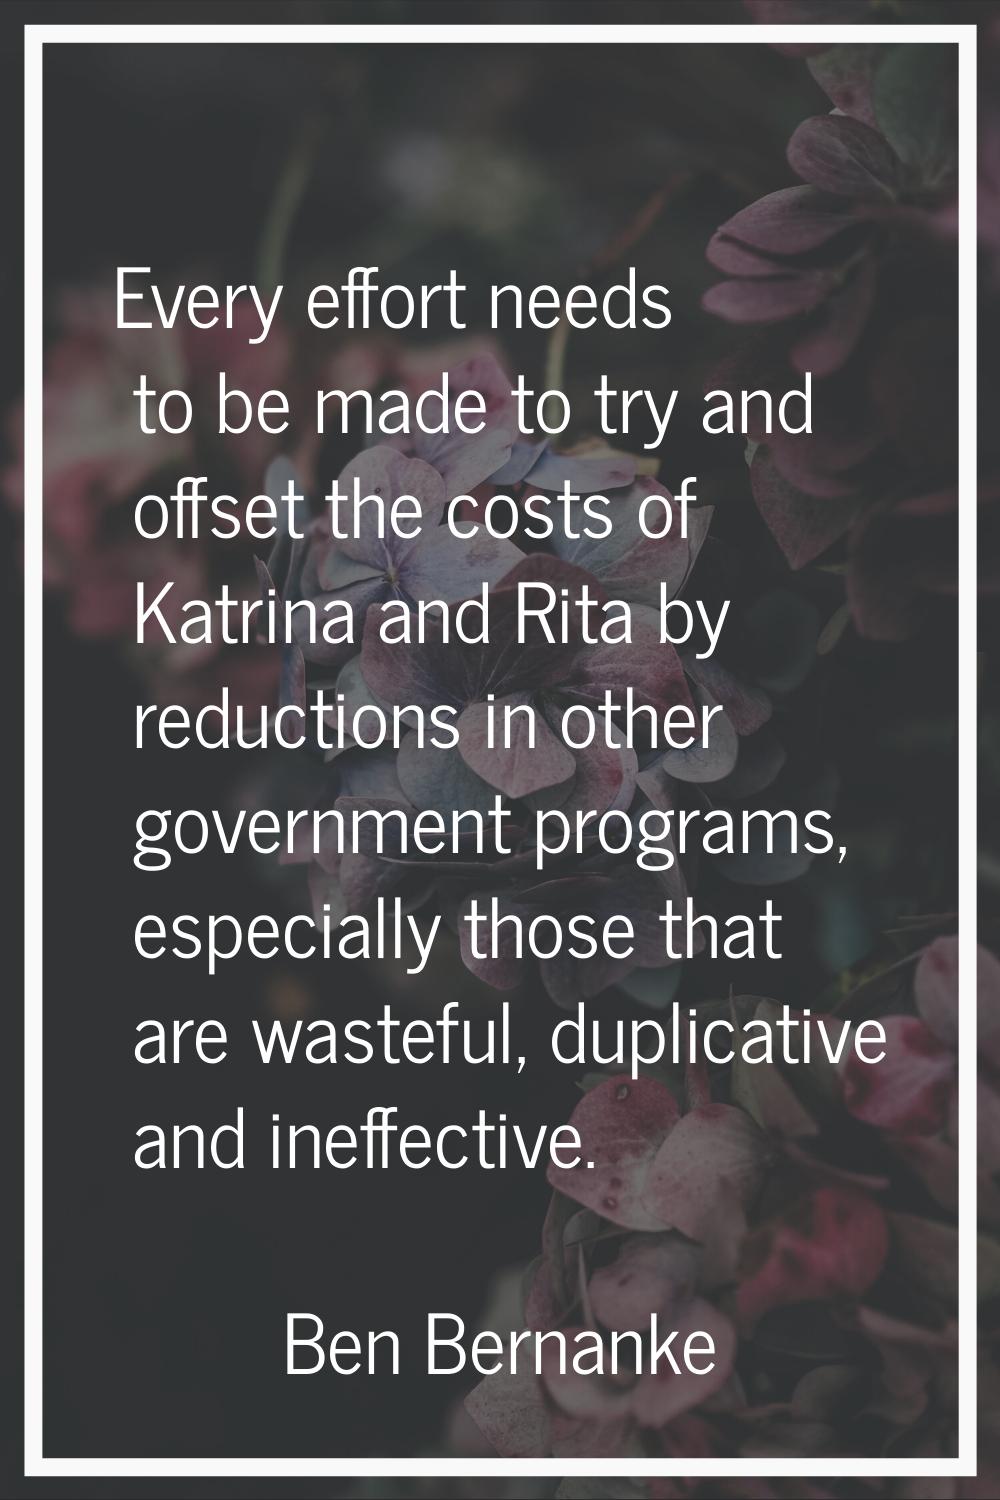 Every effort needs to be made to try and offset the costs of Katrina and Rita by reductions in othe